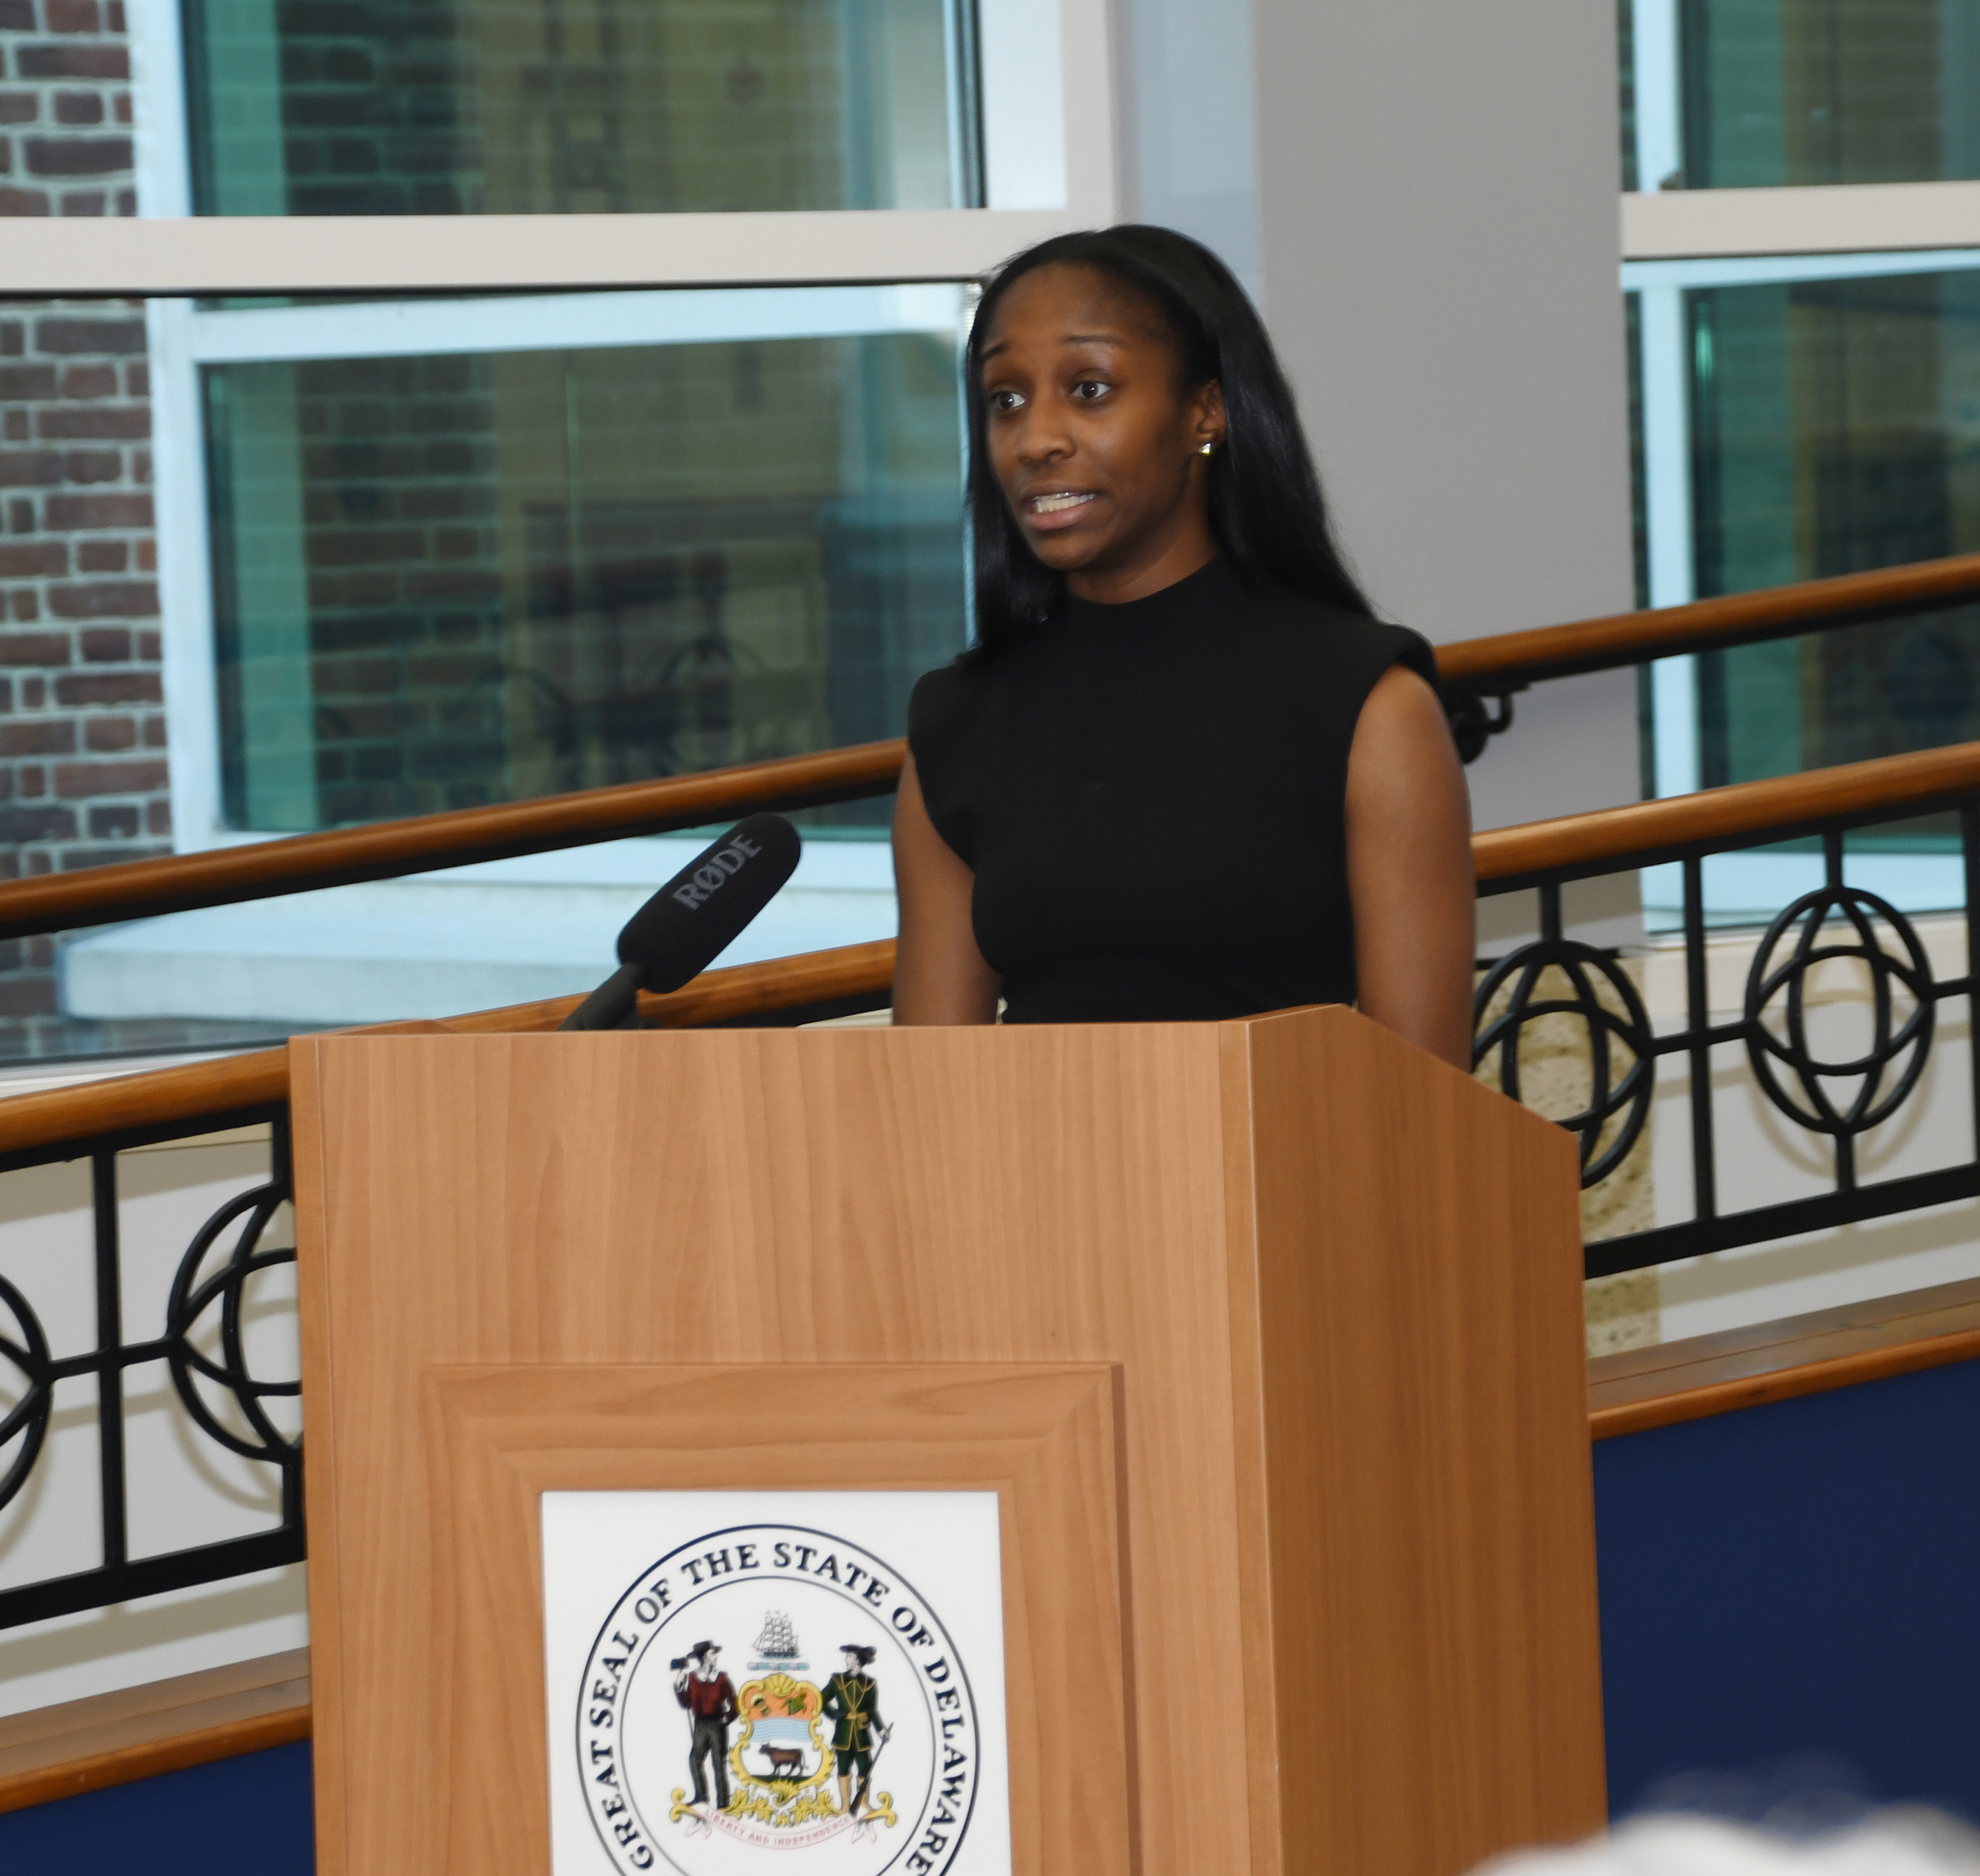 DSU's Imani Washington shared her thoughts on the importance of Black History Month